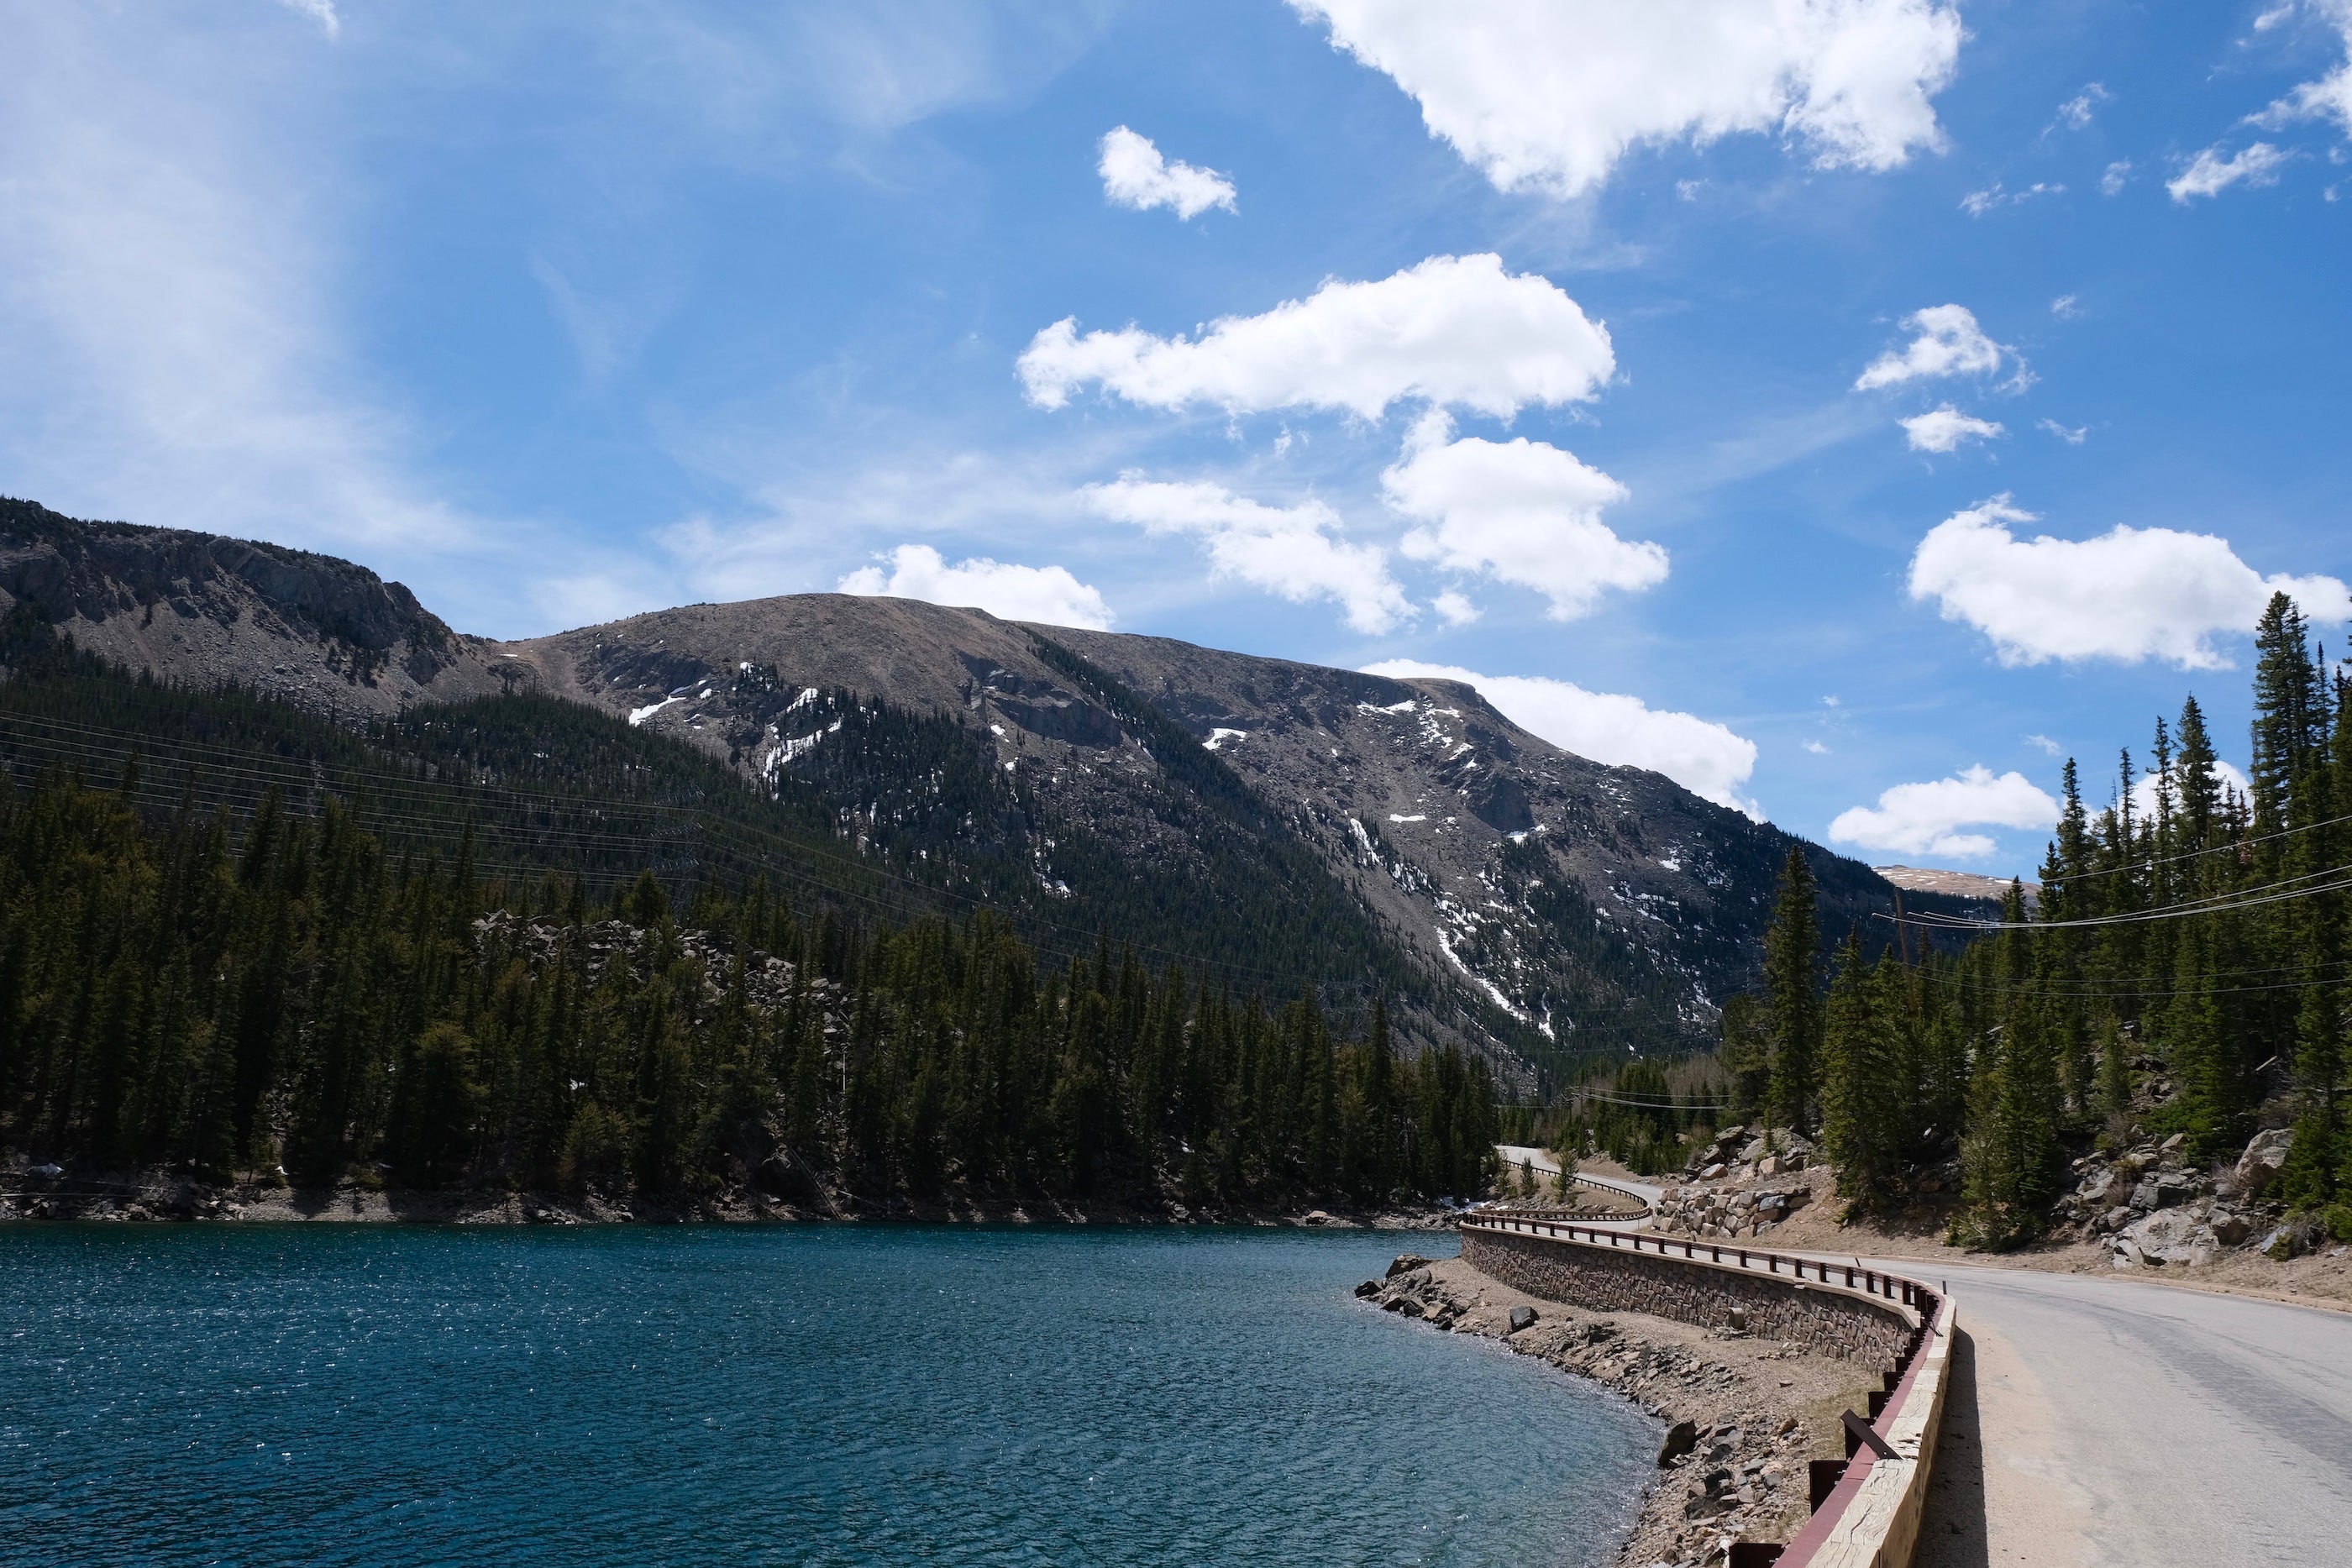 Mountain pass with a lake in Colorado